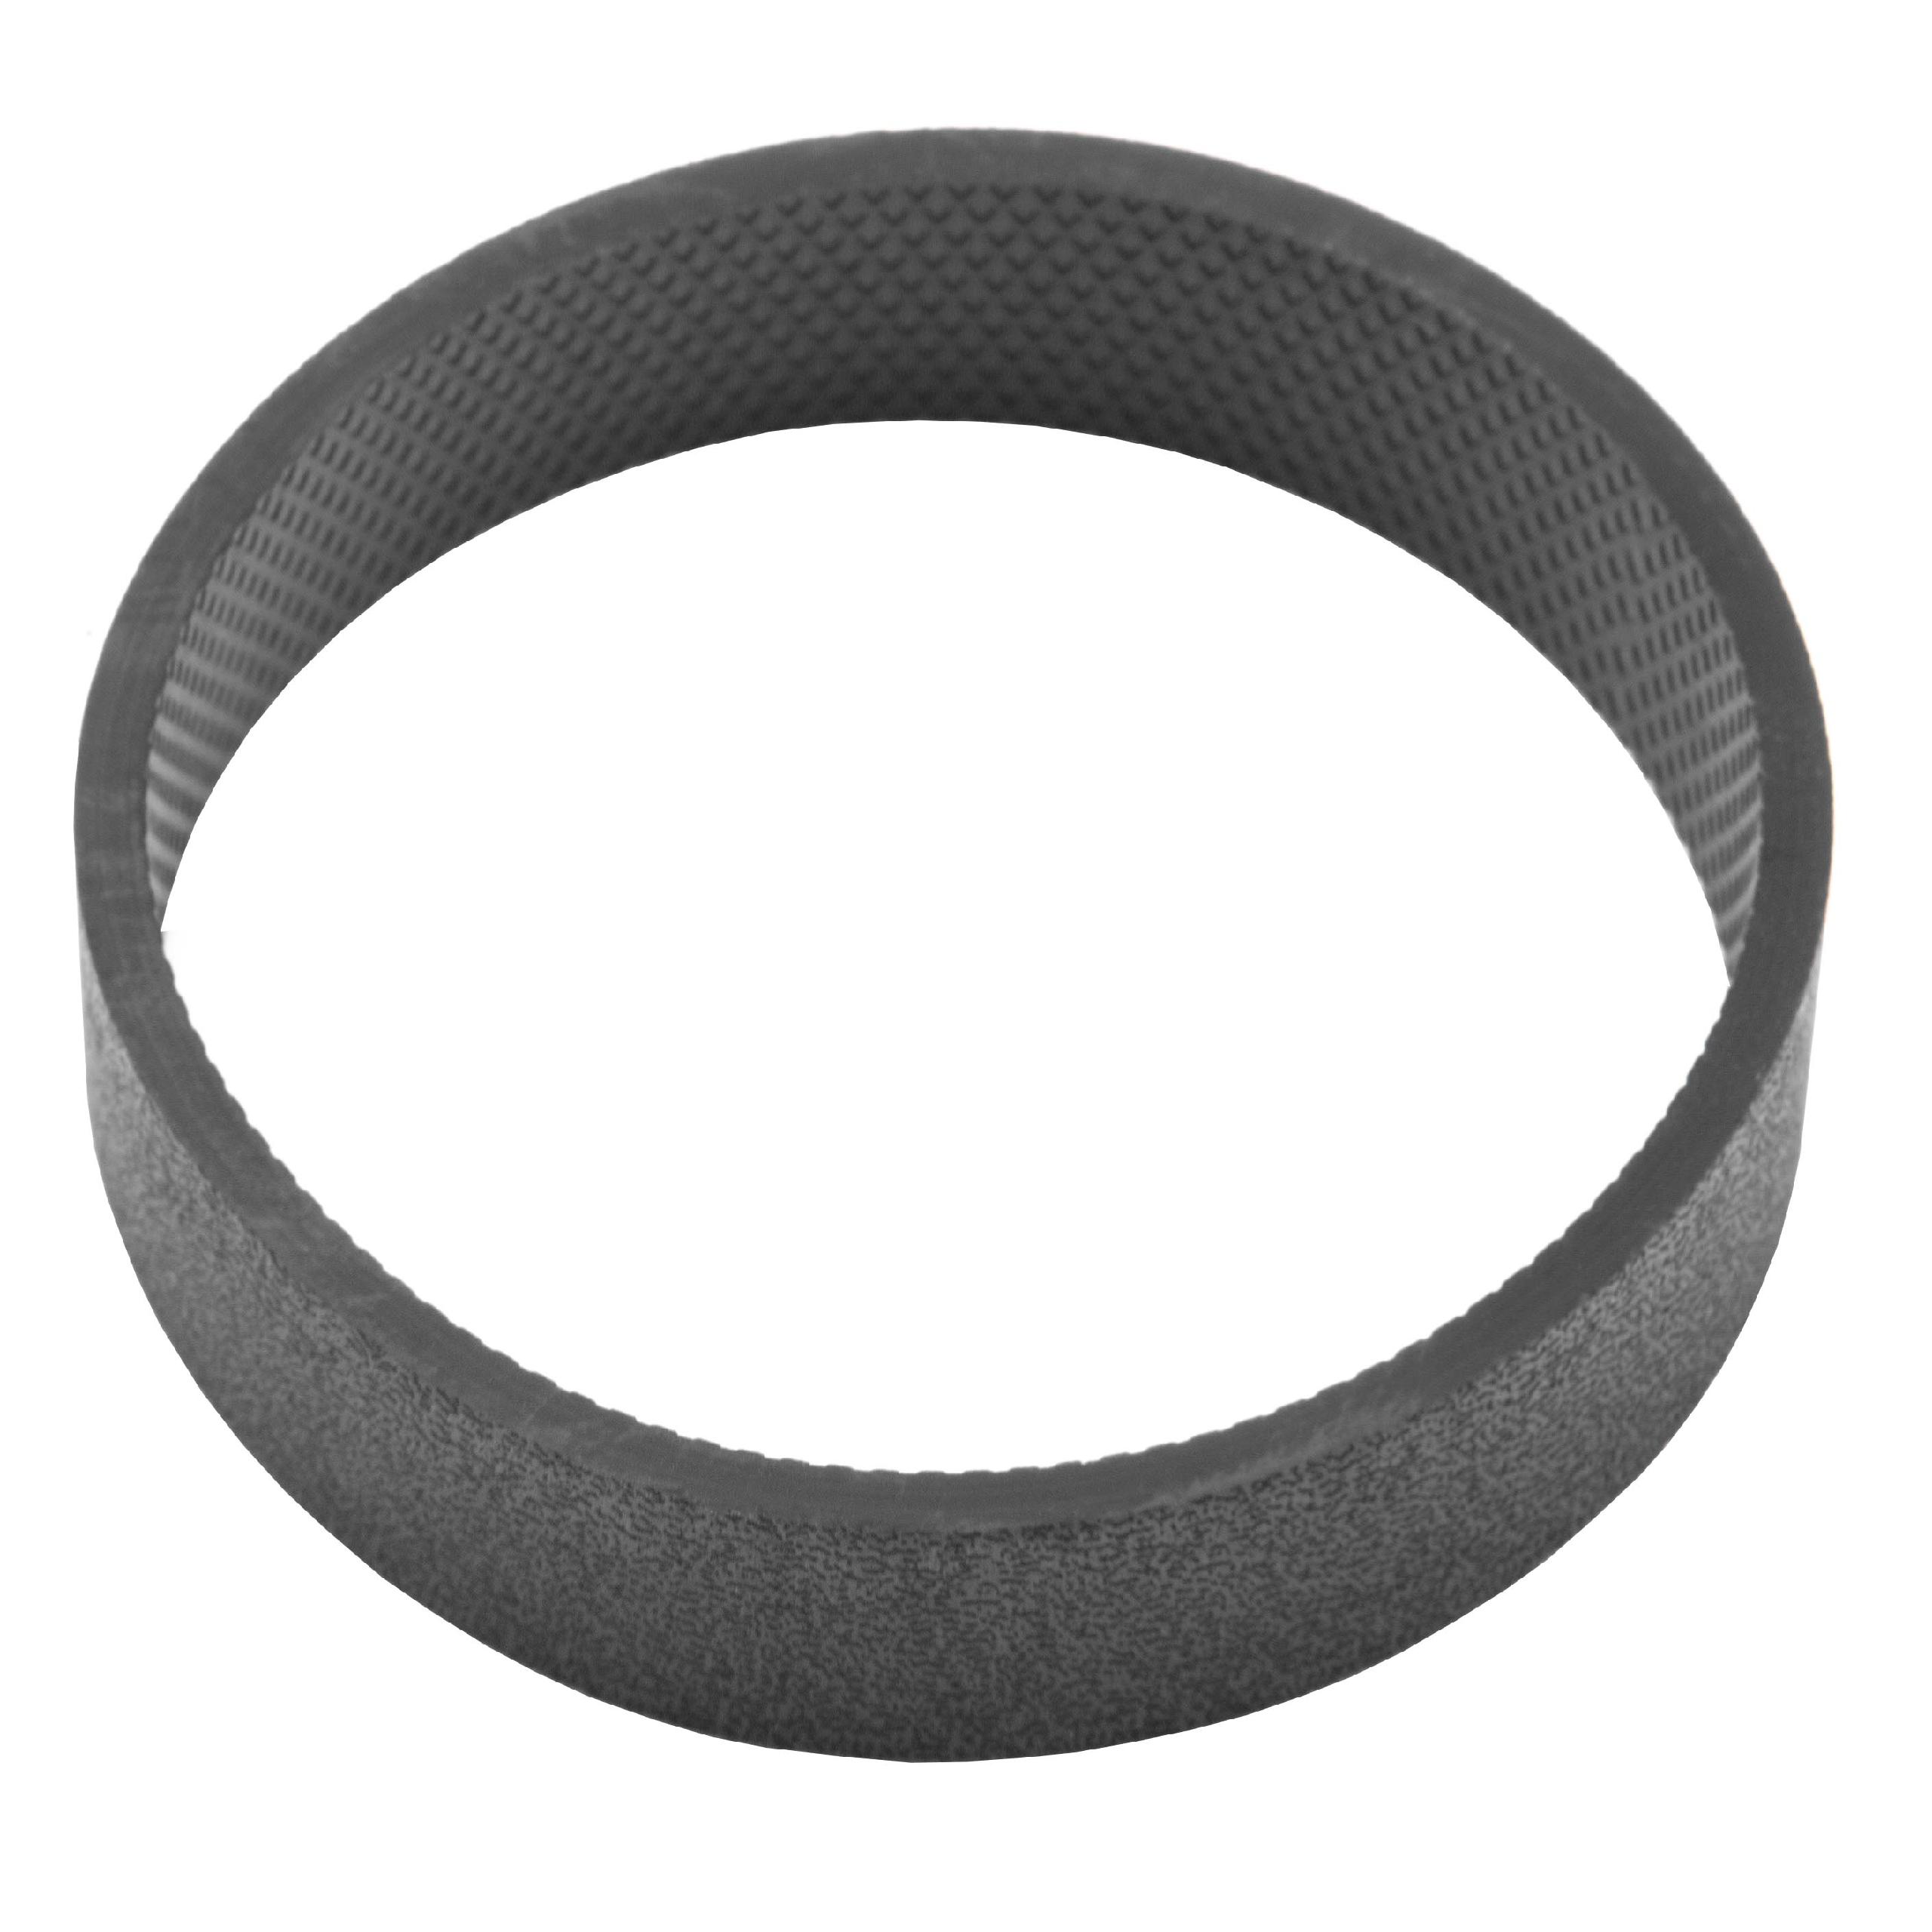 Drive Belt Replacement for Kirby 301291 for Kirby Vacuum Cleaner - Flat Belt